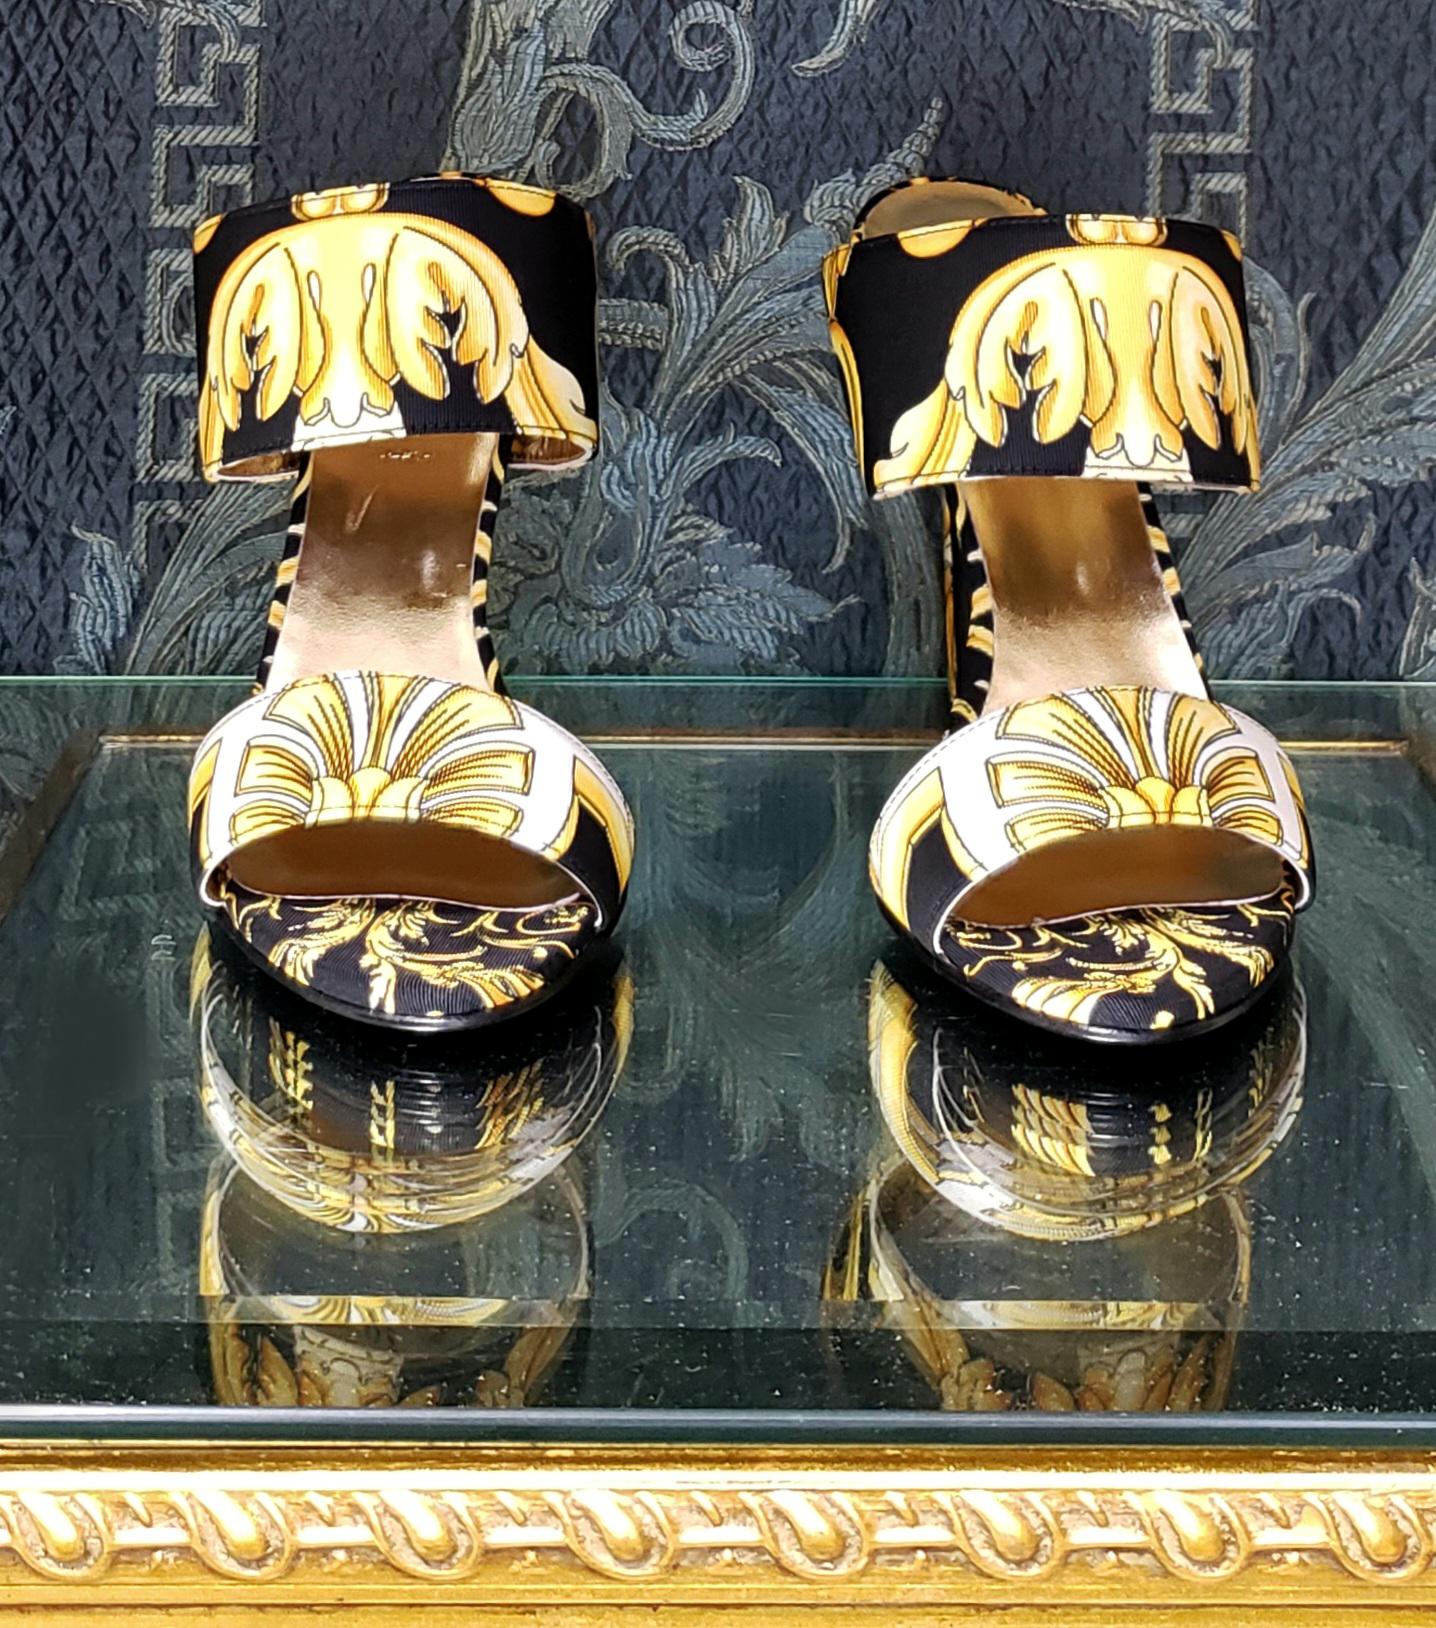 S/S 2018 l-k#12 VERSACE BAROQUE TEXTILE SANDALS In GOLD and BLACK 40 2